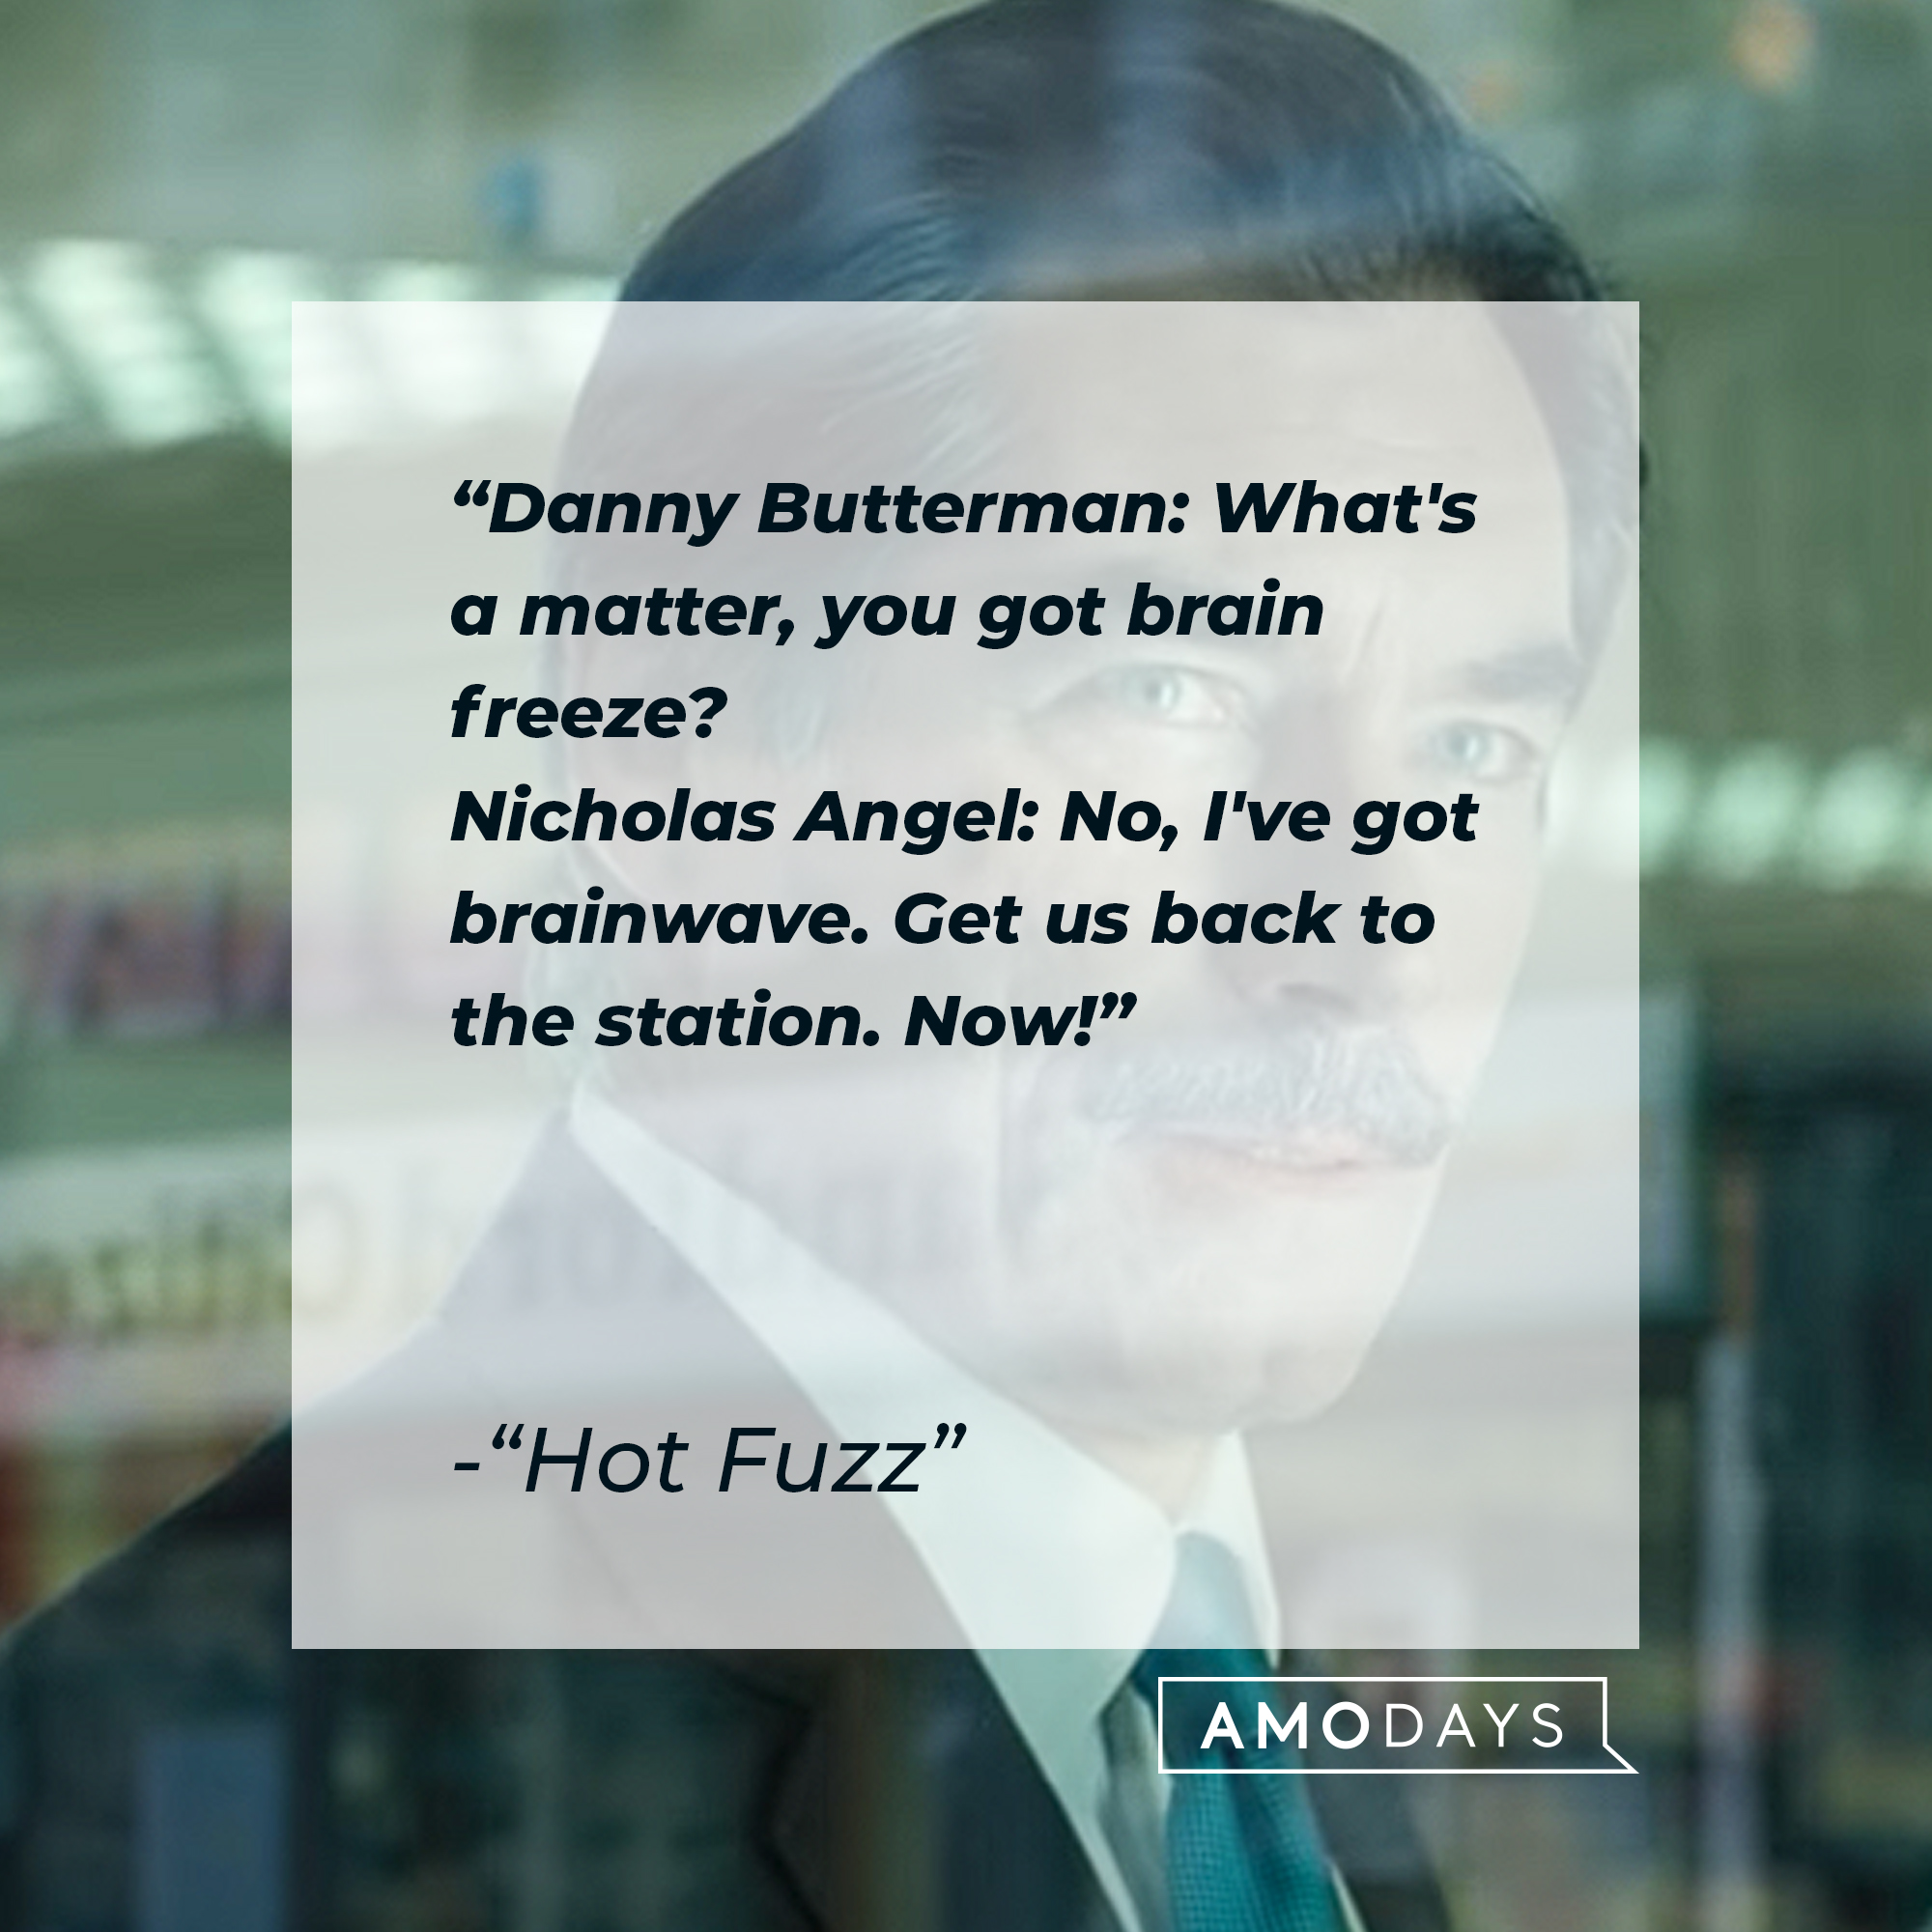 Nicholas Angel and Danny Butterman's quotes in "Hot Fuzz:" “Danny Butterman: What's a matter, you got brain freeze? Nicholas Angel: No, I've got brainwave. Get us back to the station. Now!” | Source: Youtube.com/UniversalPictures